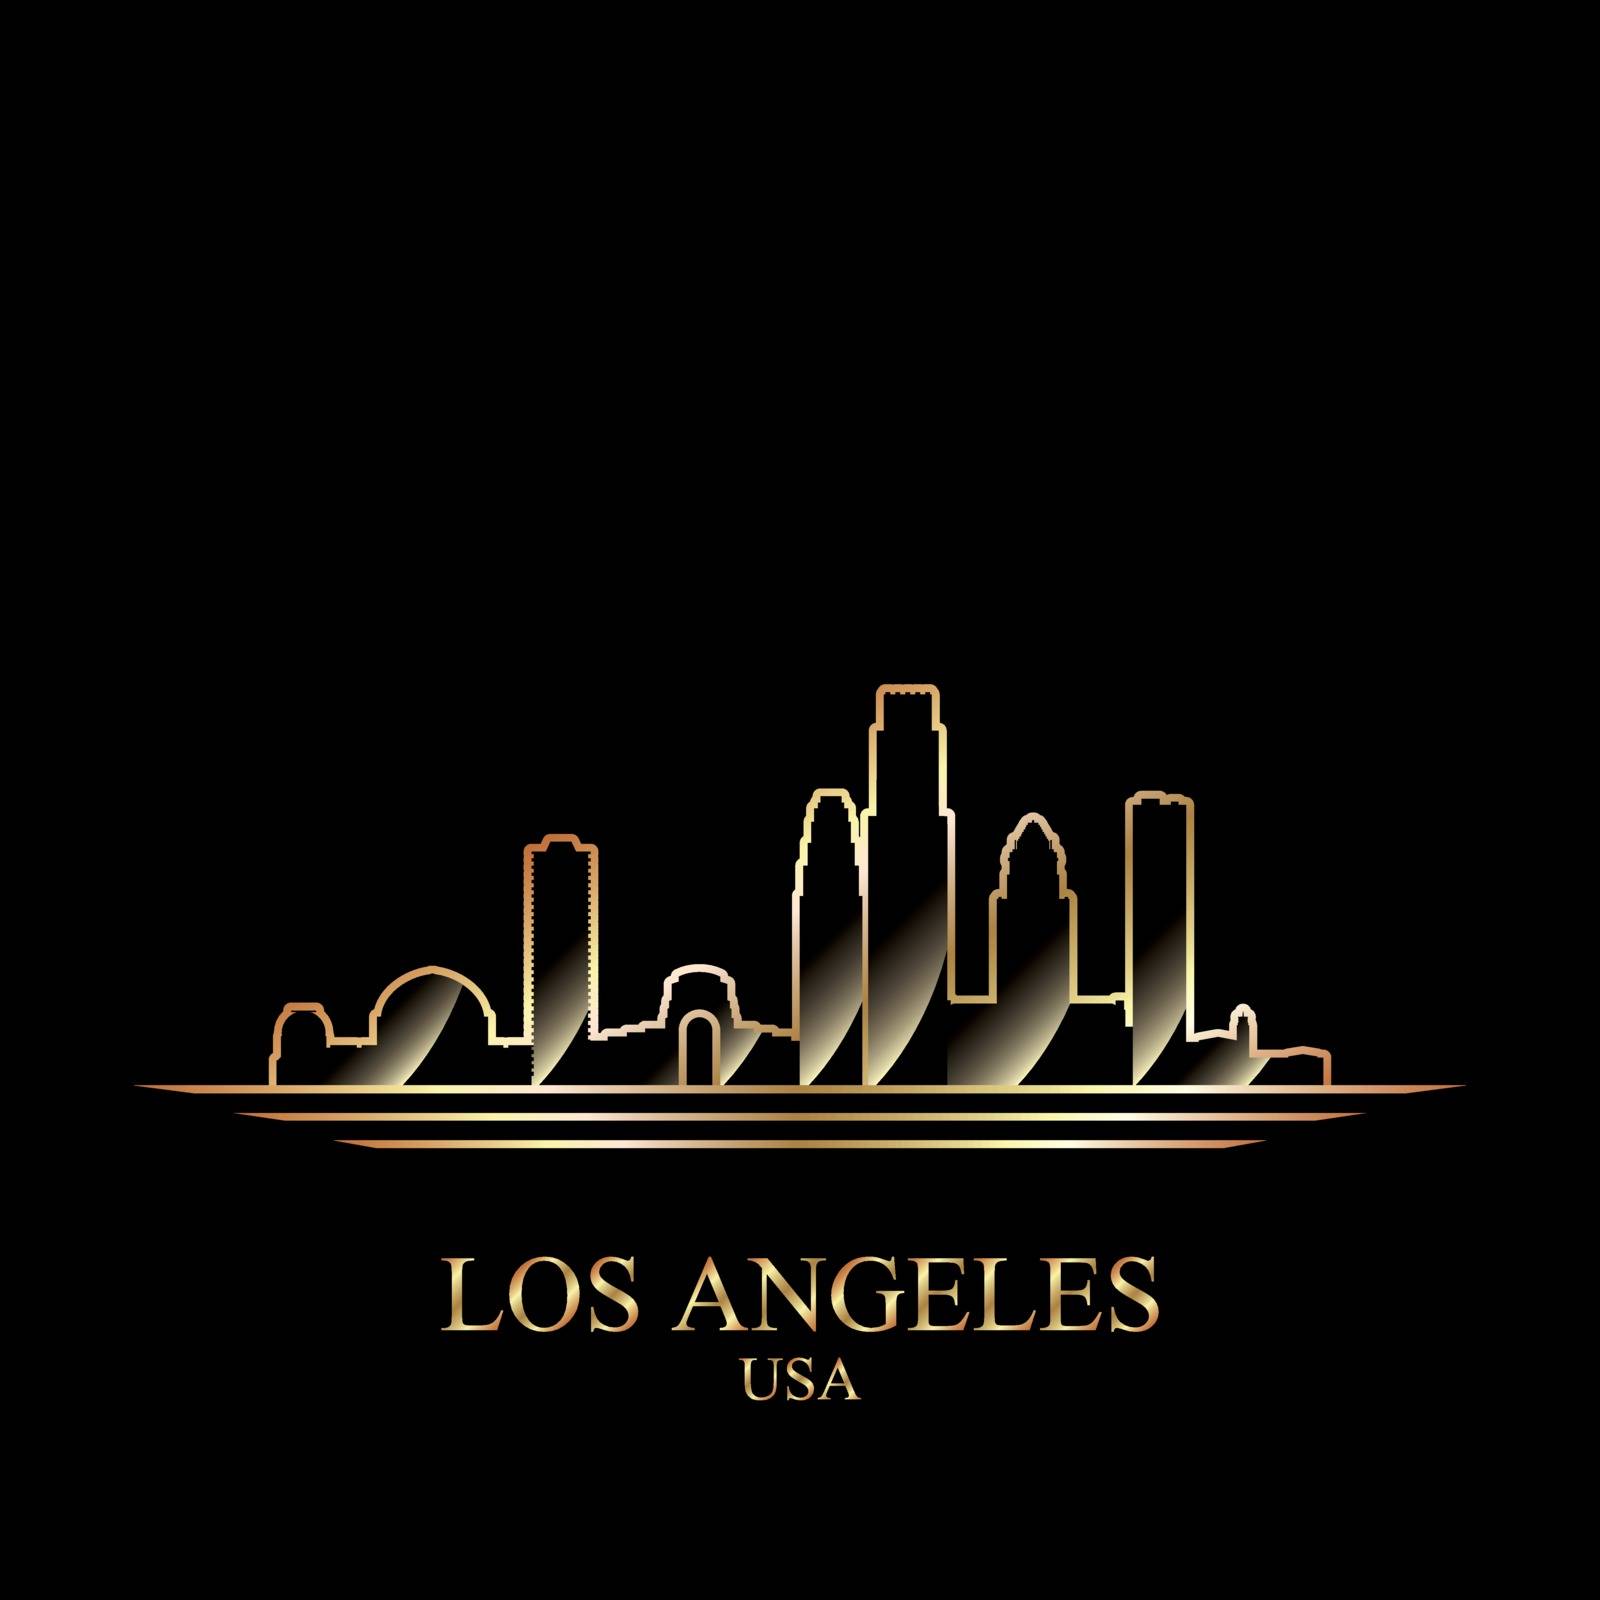 Gold silhouette of Los Angeles on black background by Ray_of_Light